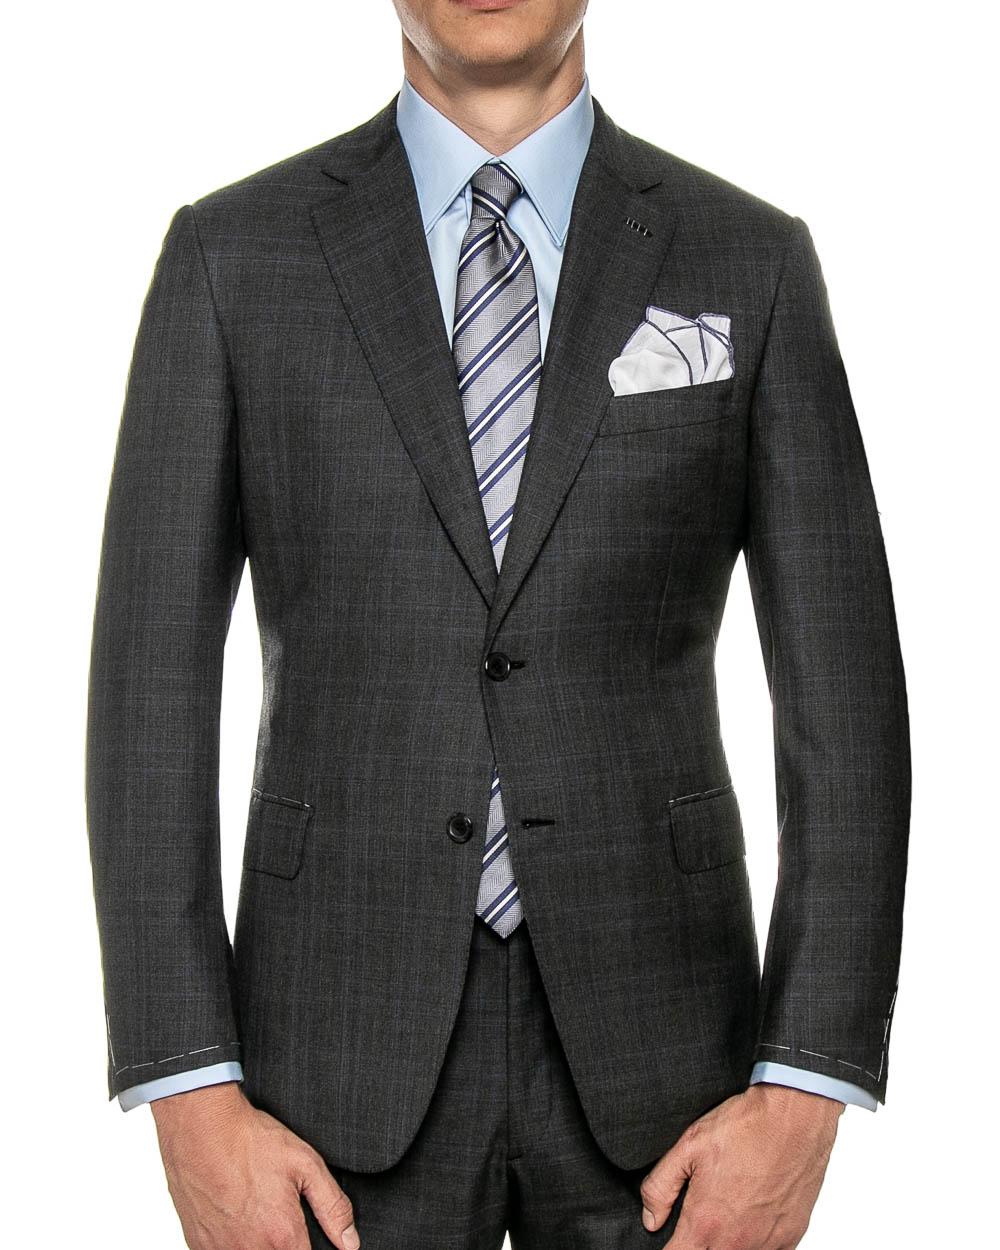 Brioni Wool Charcoal Glen Plaid With Blue Windowpane Suit 50r Itl in ...